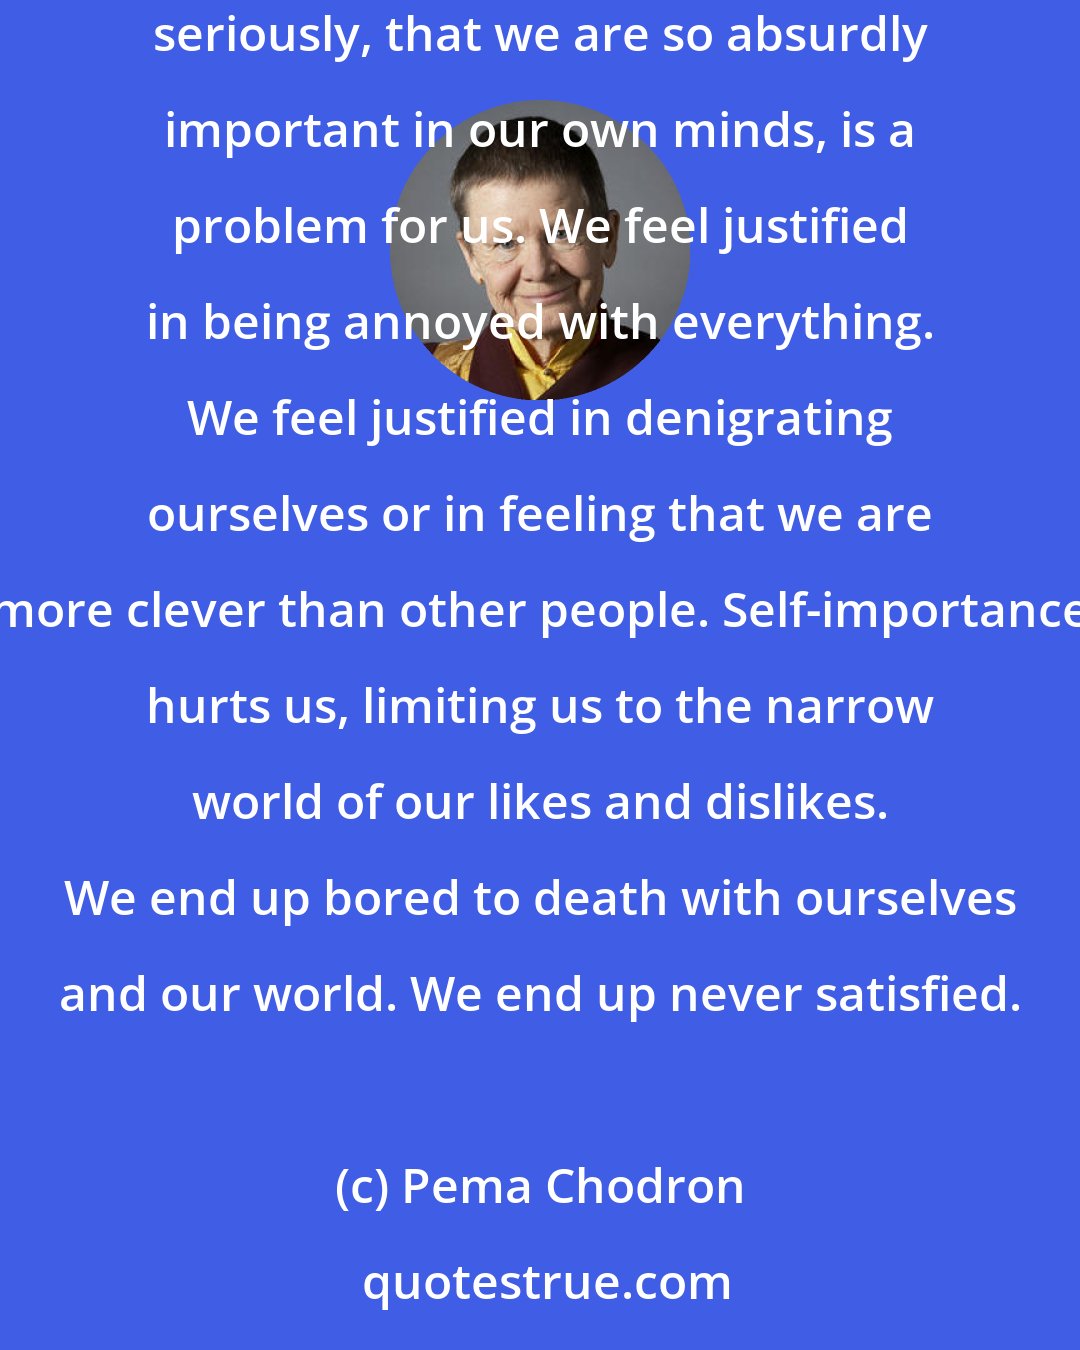 Pema Chodron: It is possible to move through the drama of our lives without believing so earnestly in the character that we play. That we take ourselves so seriously, that we are so absurdly important in our own minds, is a problem for us. We feel justified in being annoyed with everything. We feel justified in denigrating ourselves or in feeling that we are more clever than other people. Self-importance hurts us, limiting us to the narrow world of our likes and dislikes. We end up bored to death with ourselves and our world. We end up never satisfied.